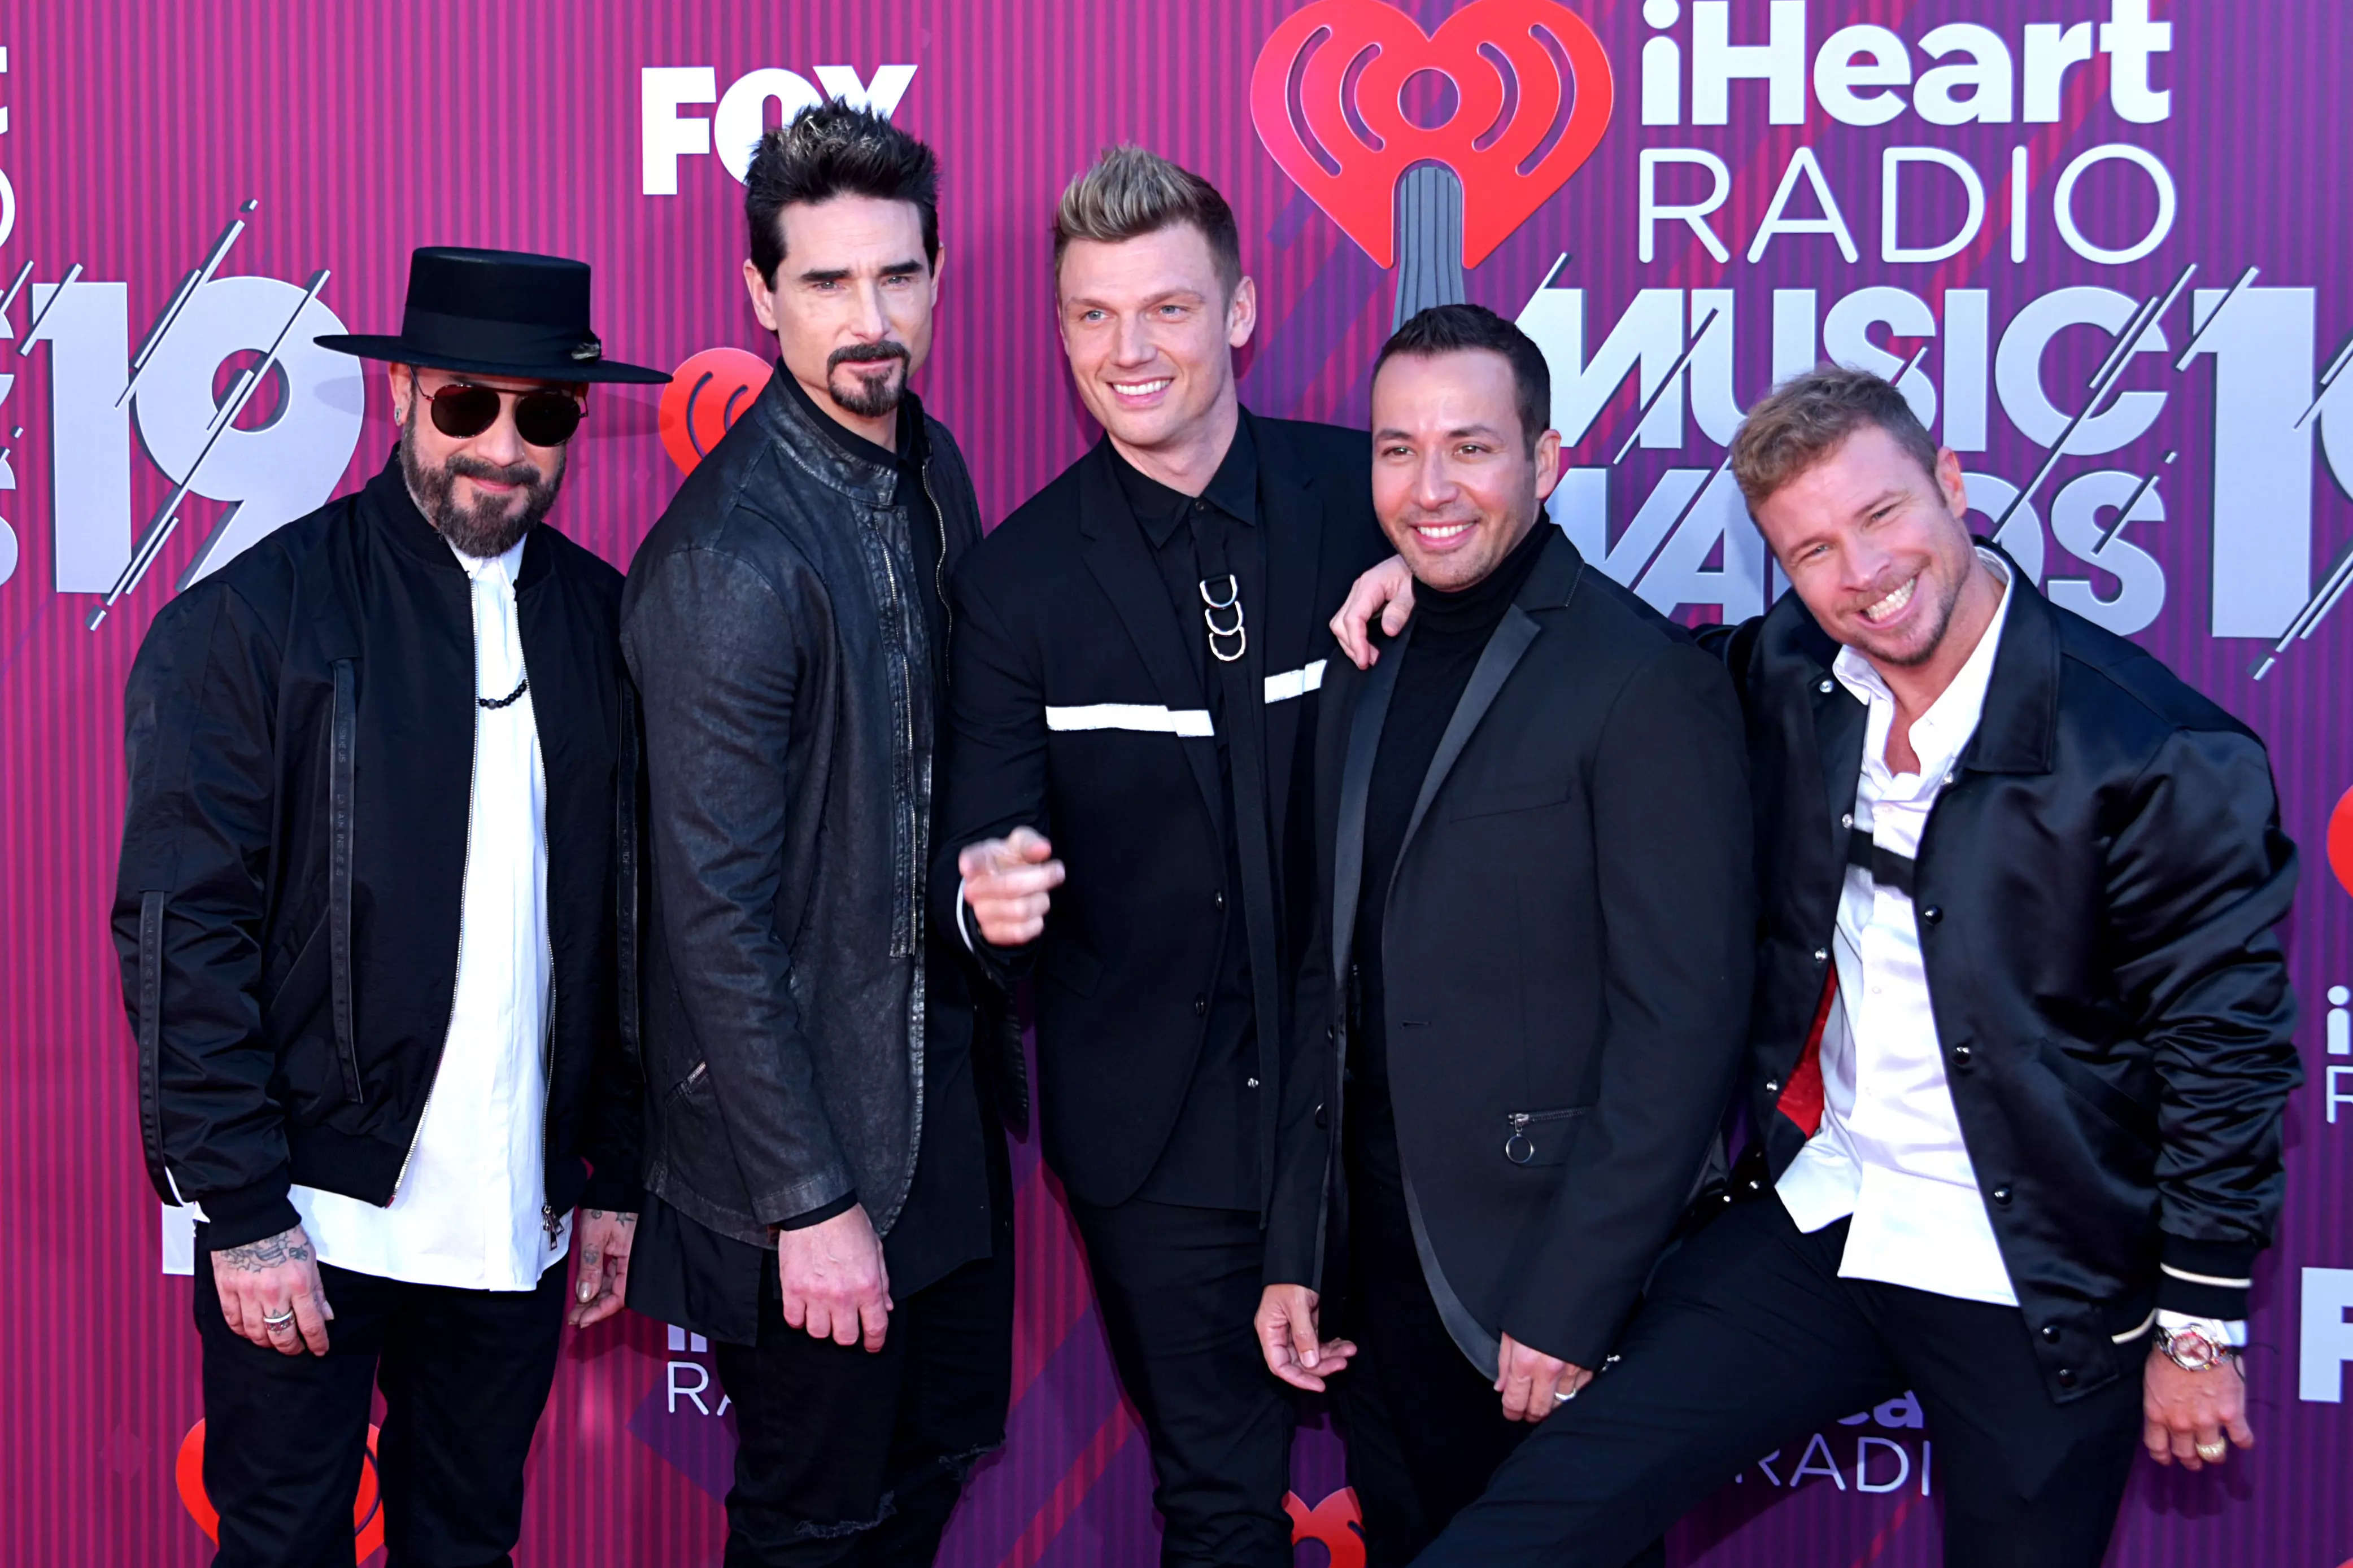 Backstreet Boys to make comeback to India after 13 years! To perform in Delhi and Mumbai on these dates